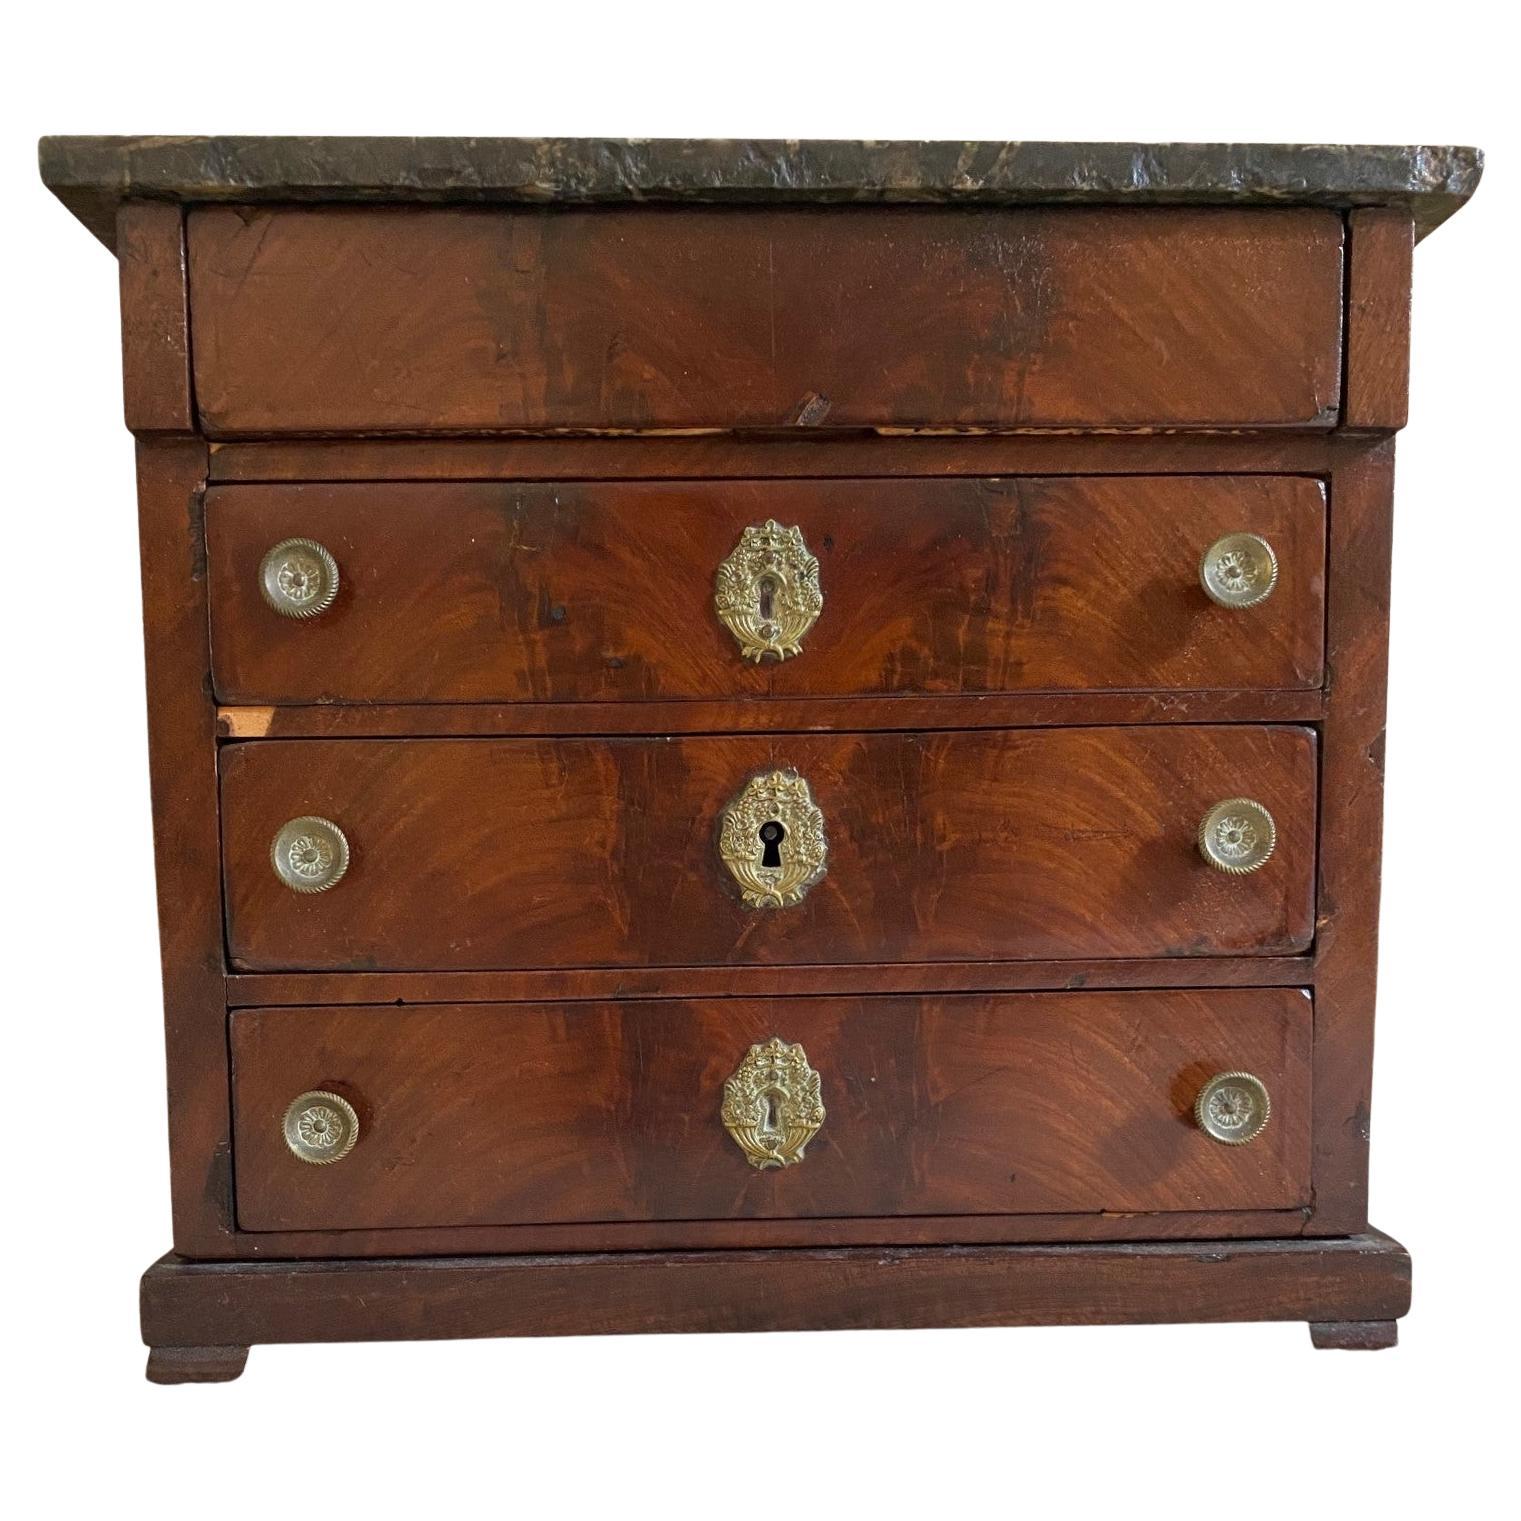 Miniature 19th Century Victorian Figured Mahogany Chest of Drawers For Sale